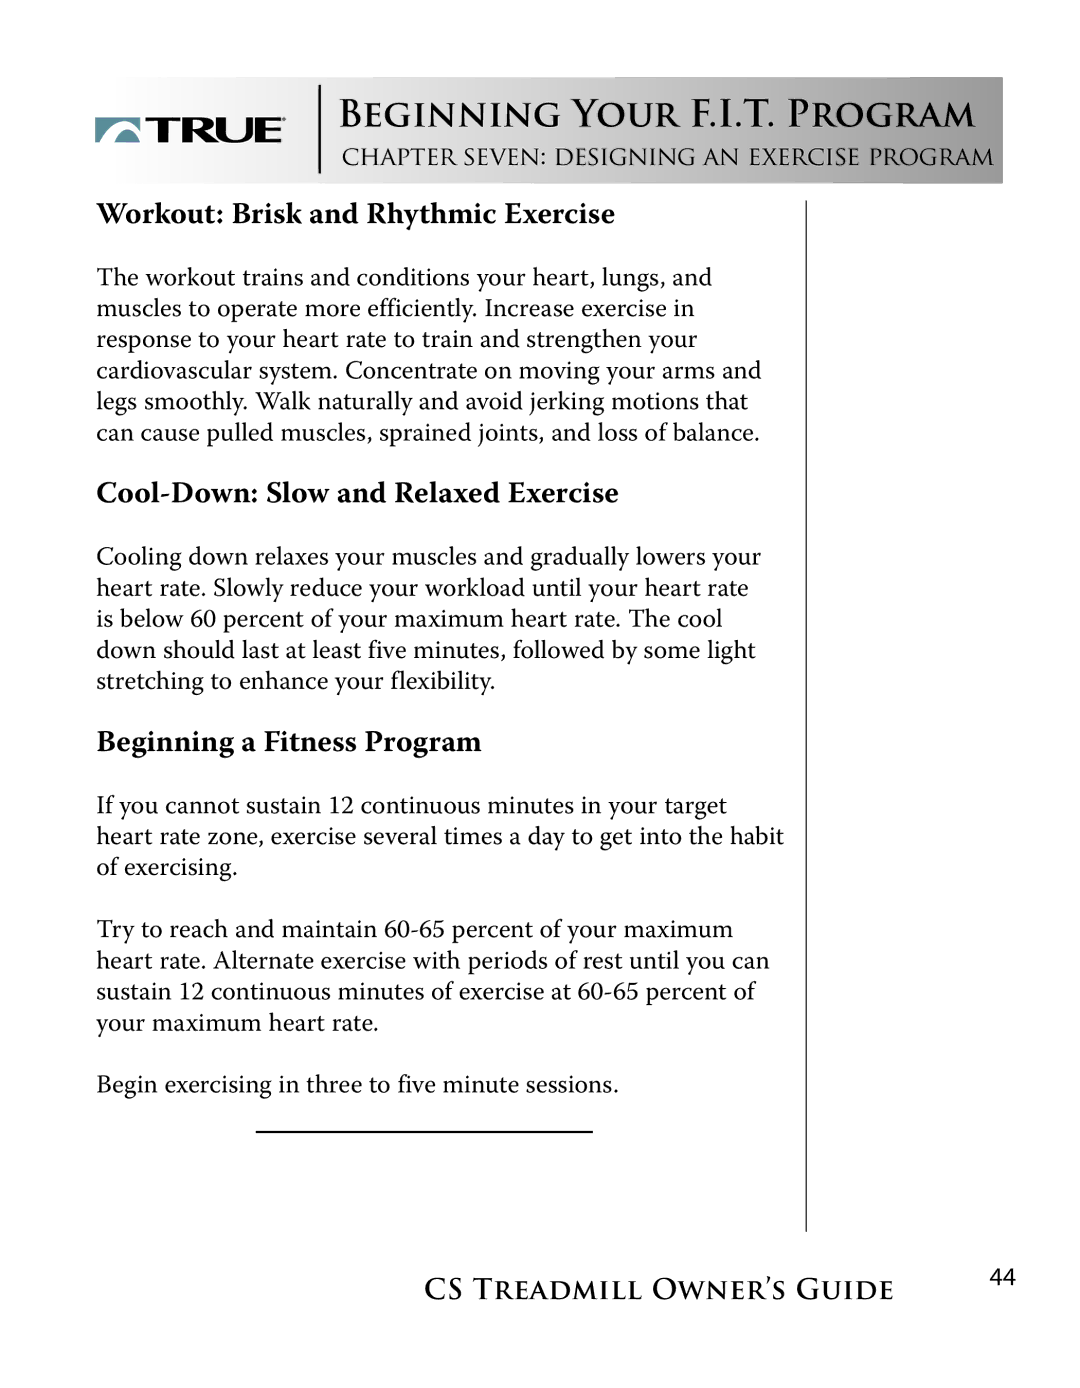 True Fitness Cs3.0, Cs5.0 manual Workout Brisk and Rhythmic Exercise 